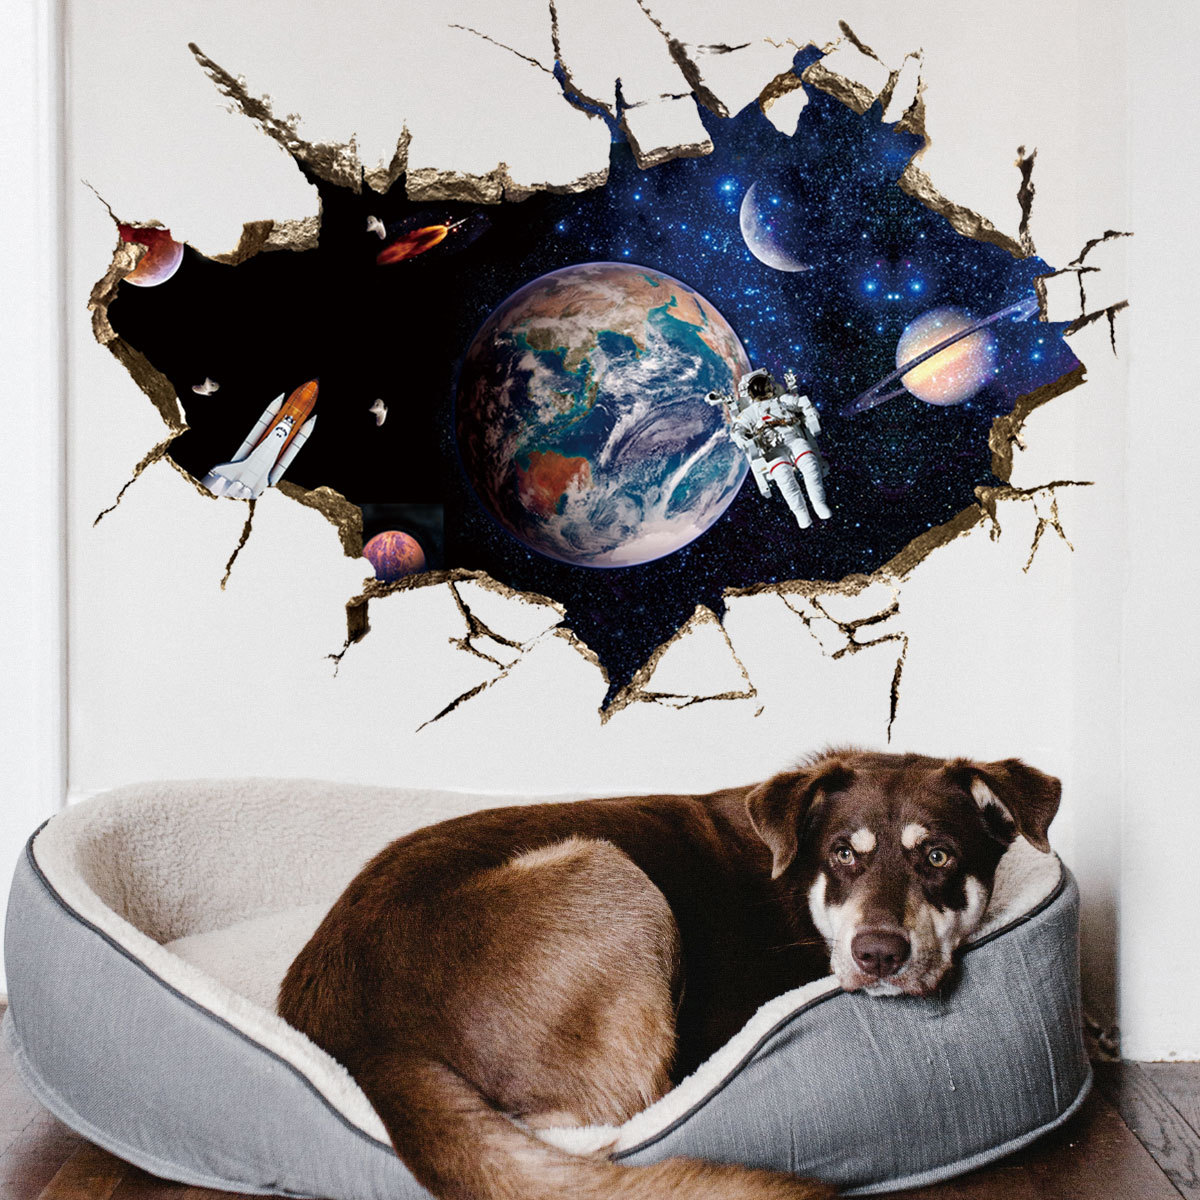 Space Wall Stickers Space Wall Decals Space Stickers for Bedroom